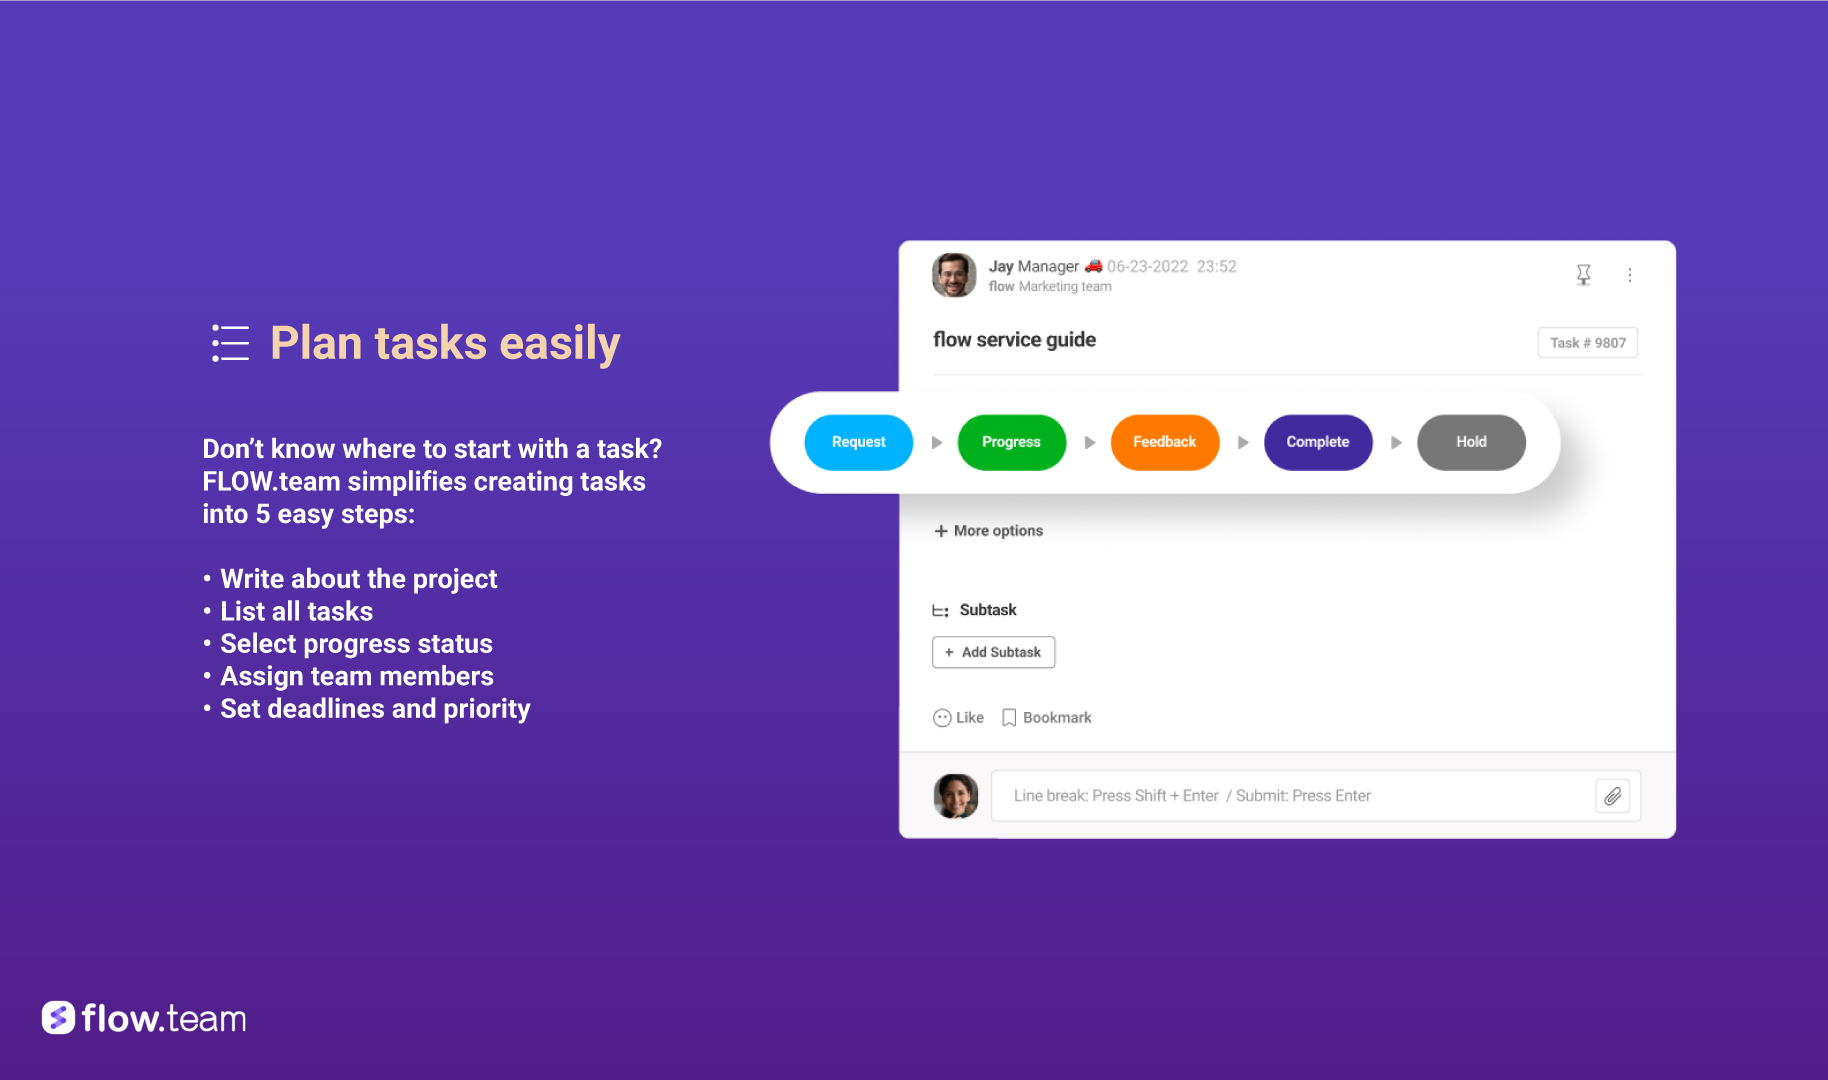 Plan and track tasks easily